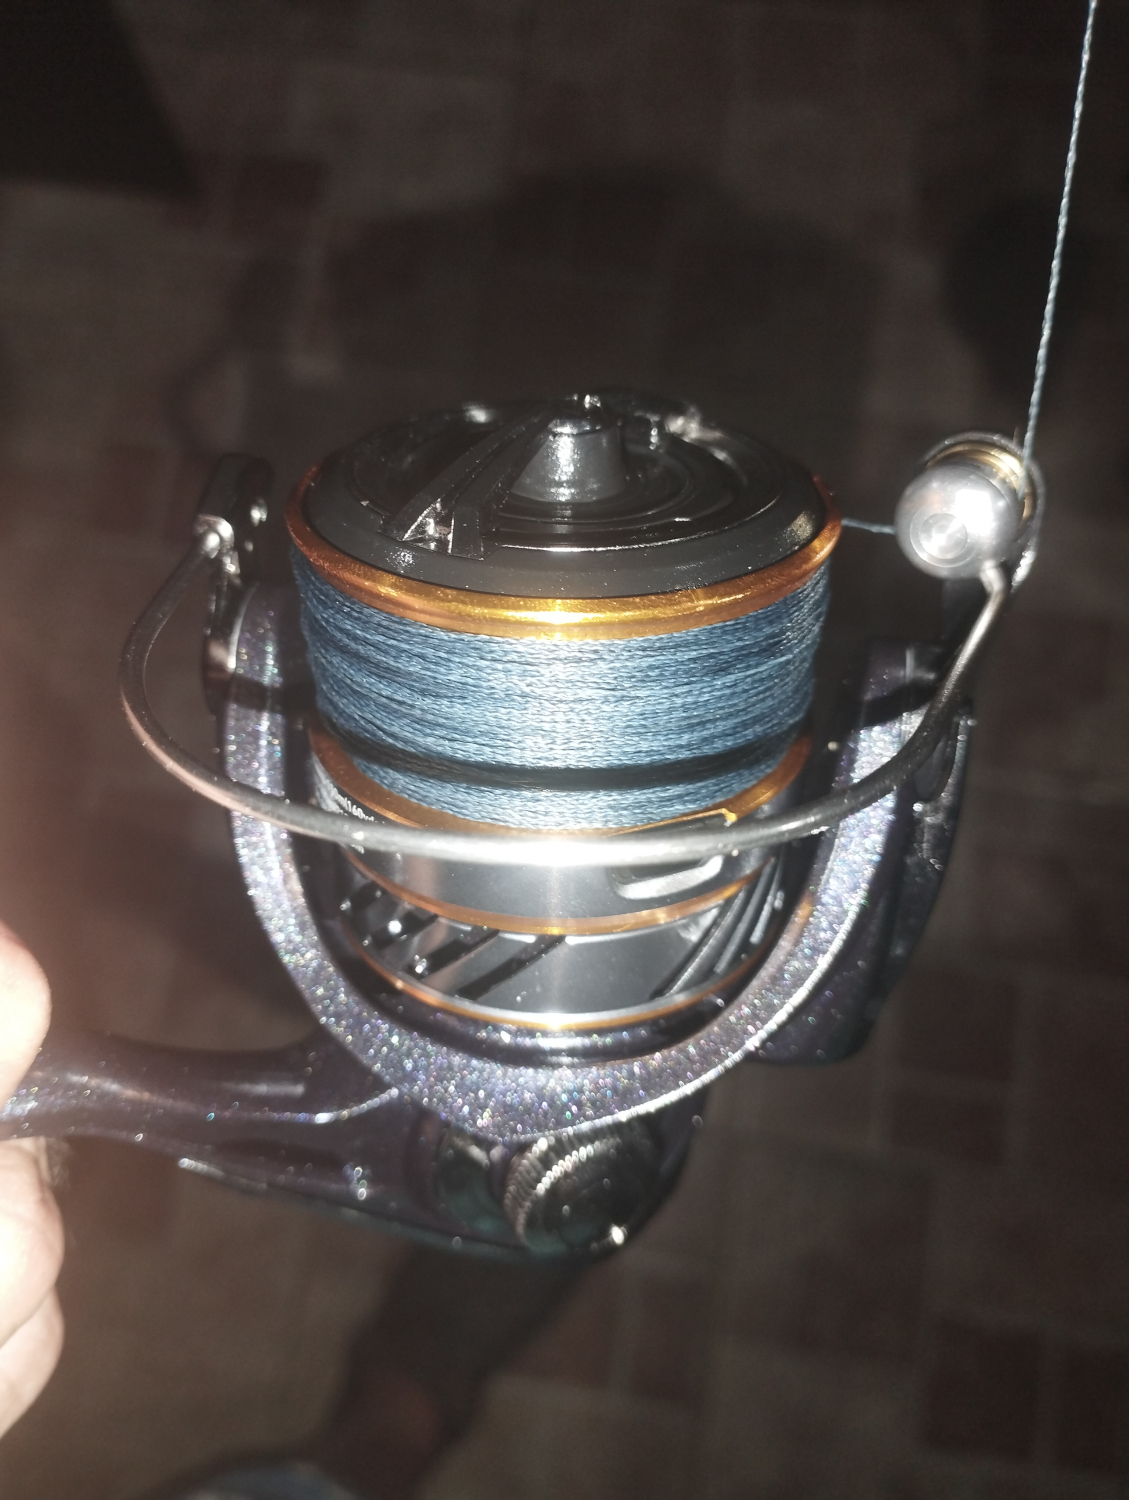 Revros REVLT 1000-CP Spinning Reels - Bass, Panfish, and Trout Fishing